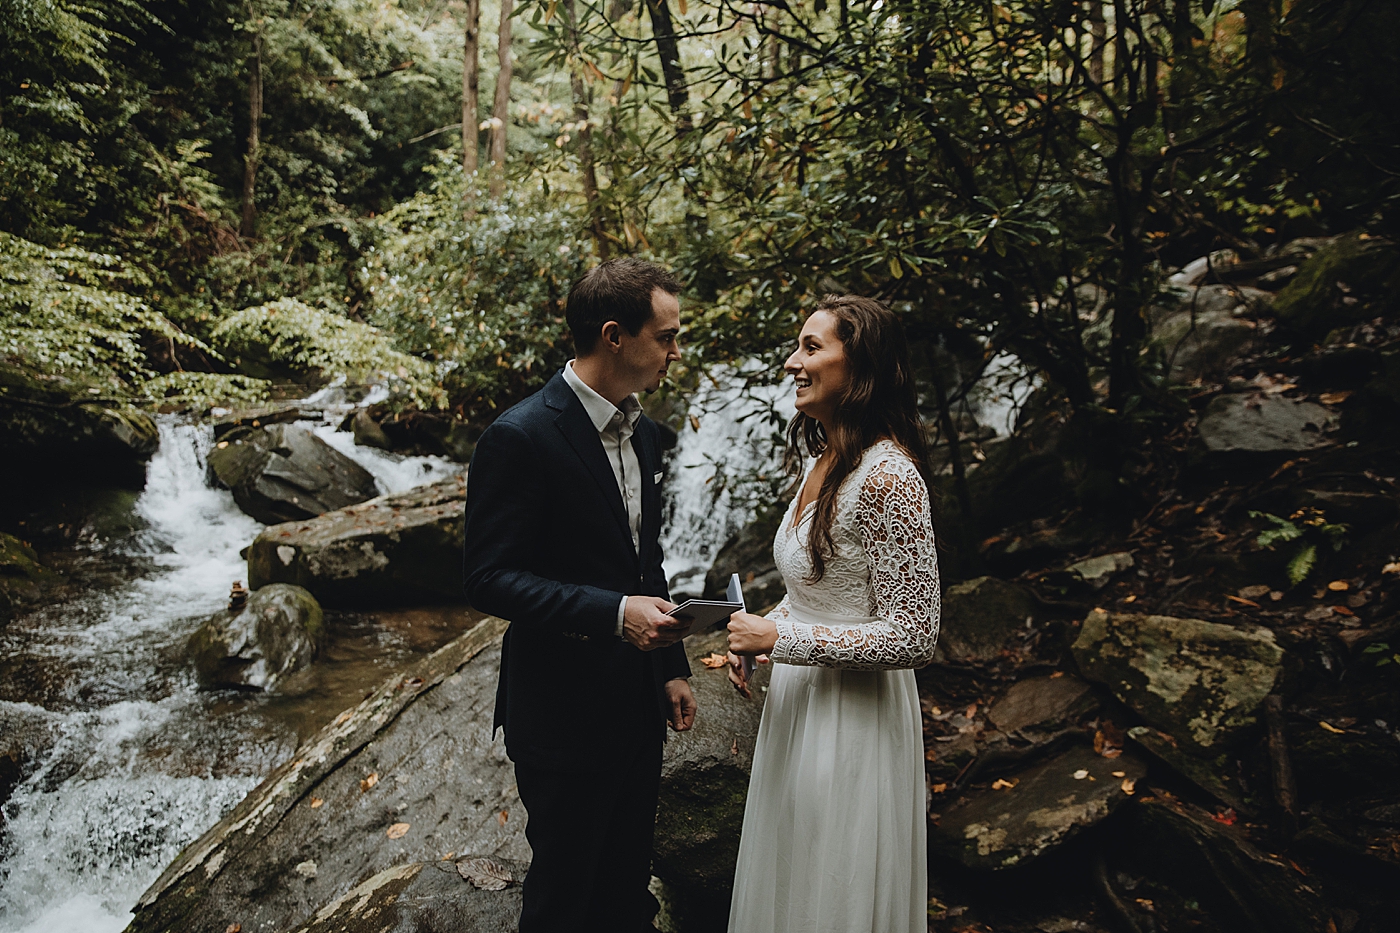 Bride and Groom delivering vows in forest Catawba Falls Asheville, NC Elopement Photography captured by Maggie Alvarez Photography